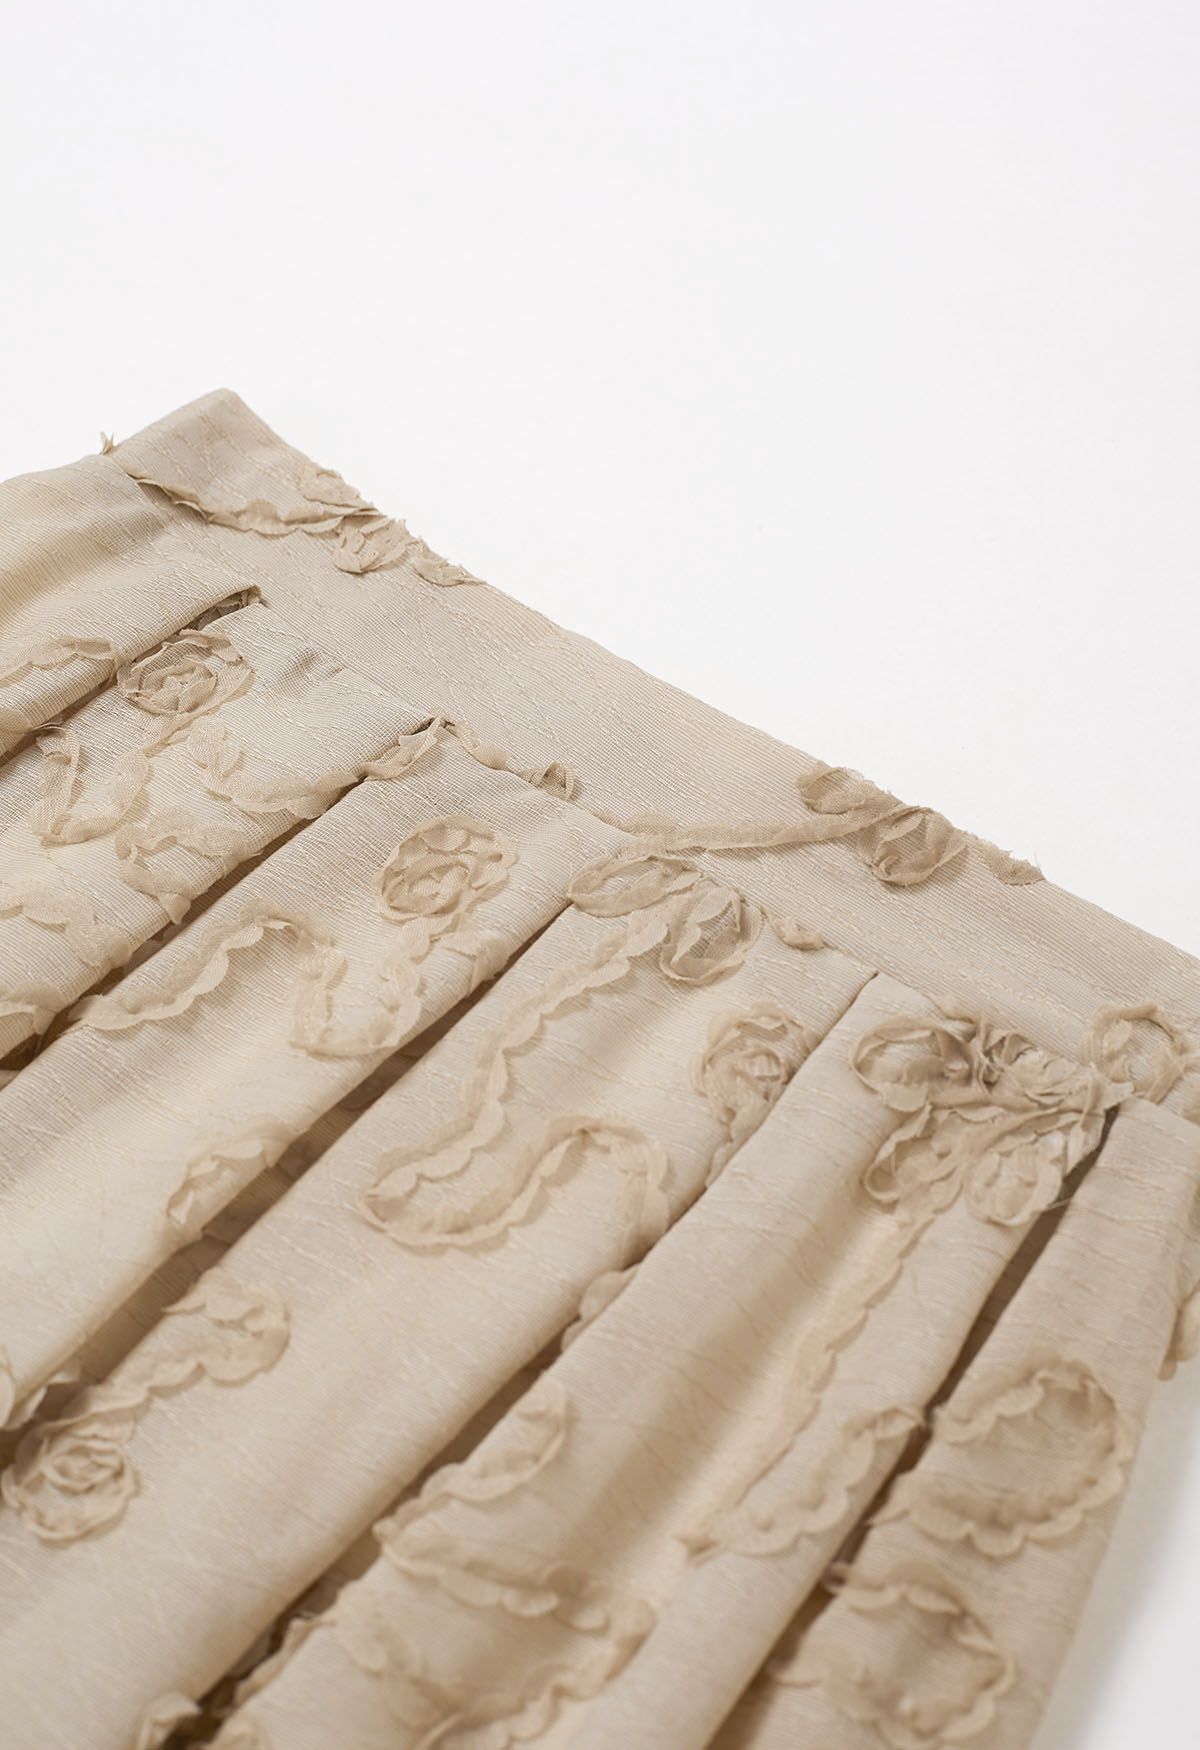 Floral and Stem Jacquard Pleated Midi Skirt in Light Tan